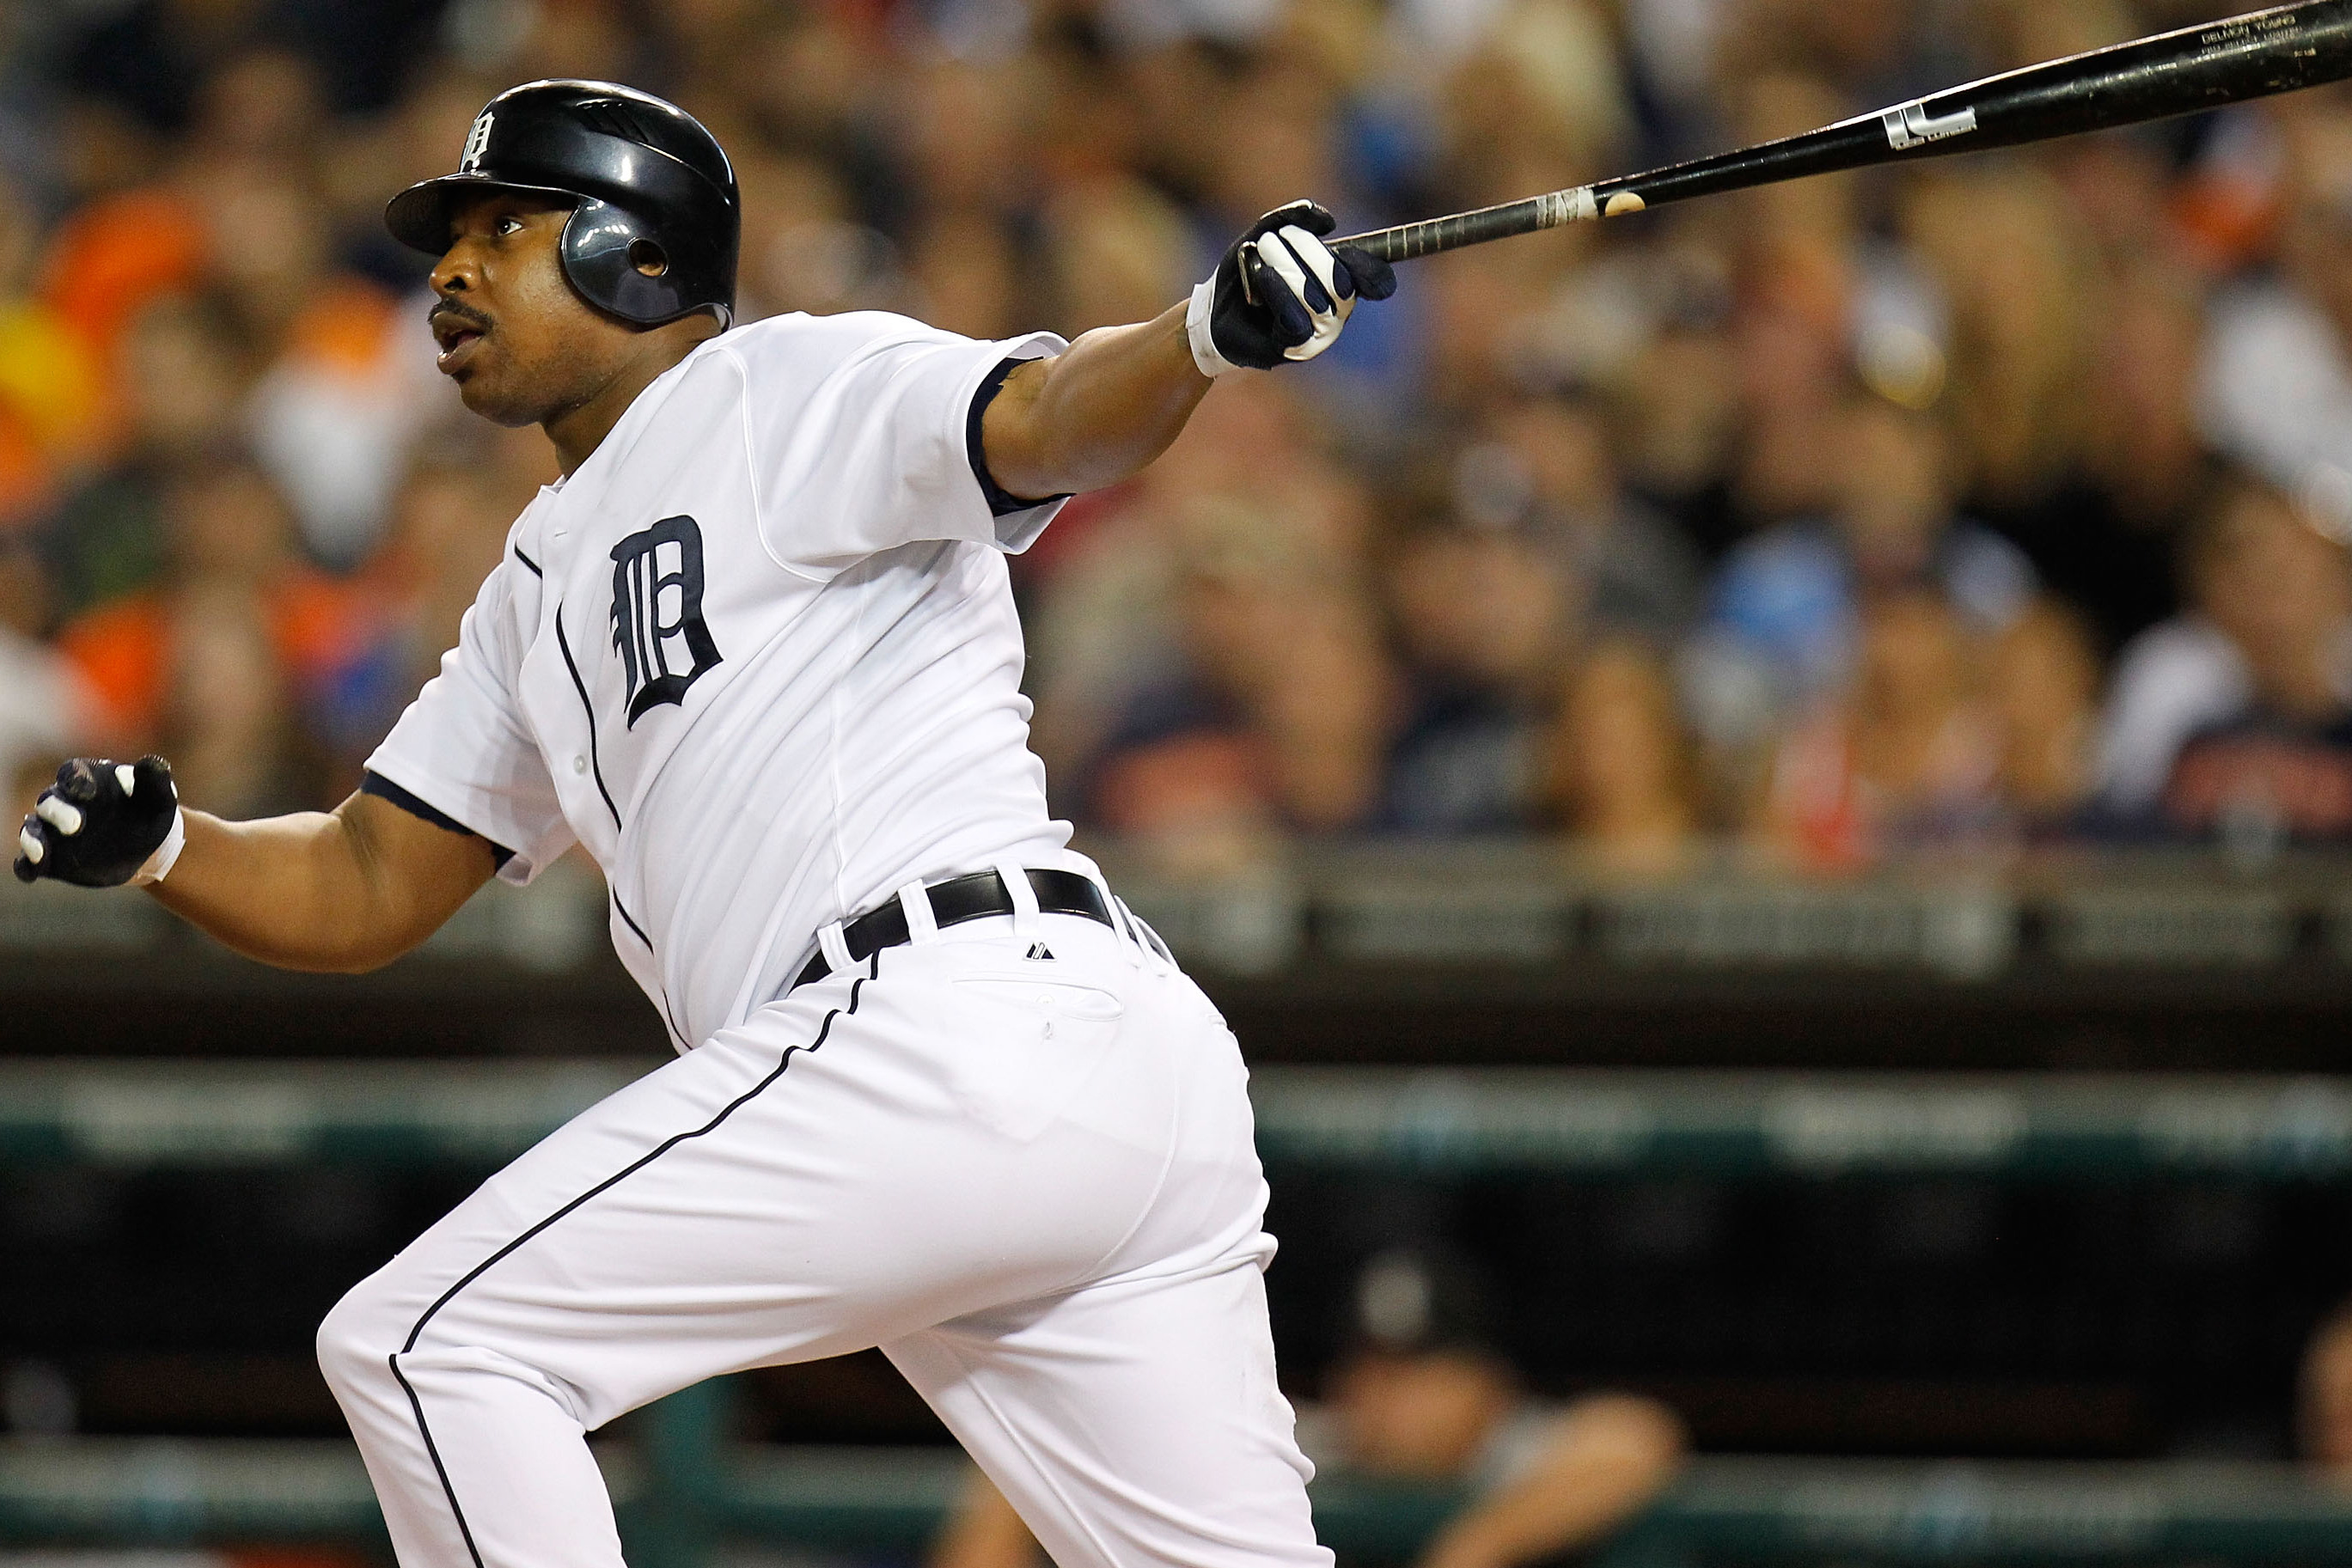 Detroit Tigers host Seattle Mariners at in night game at Comerica